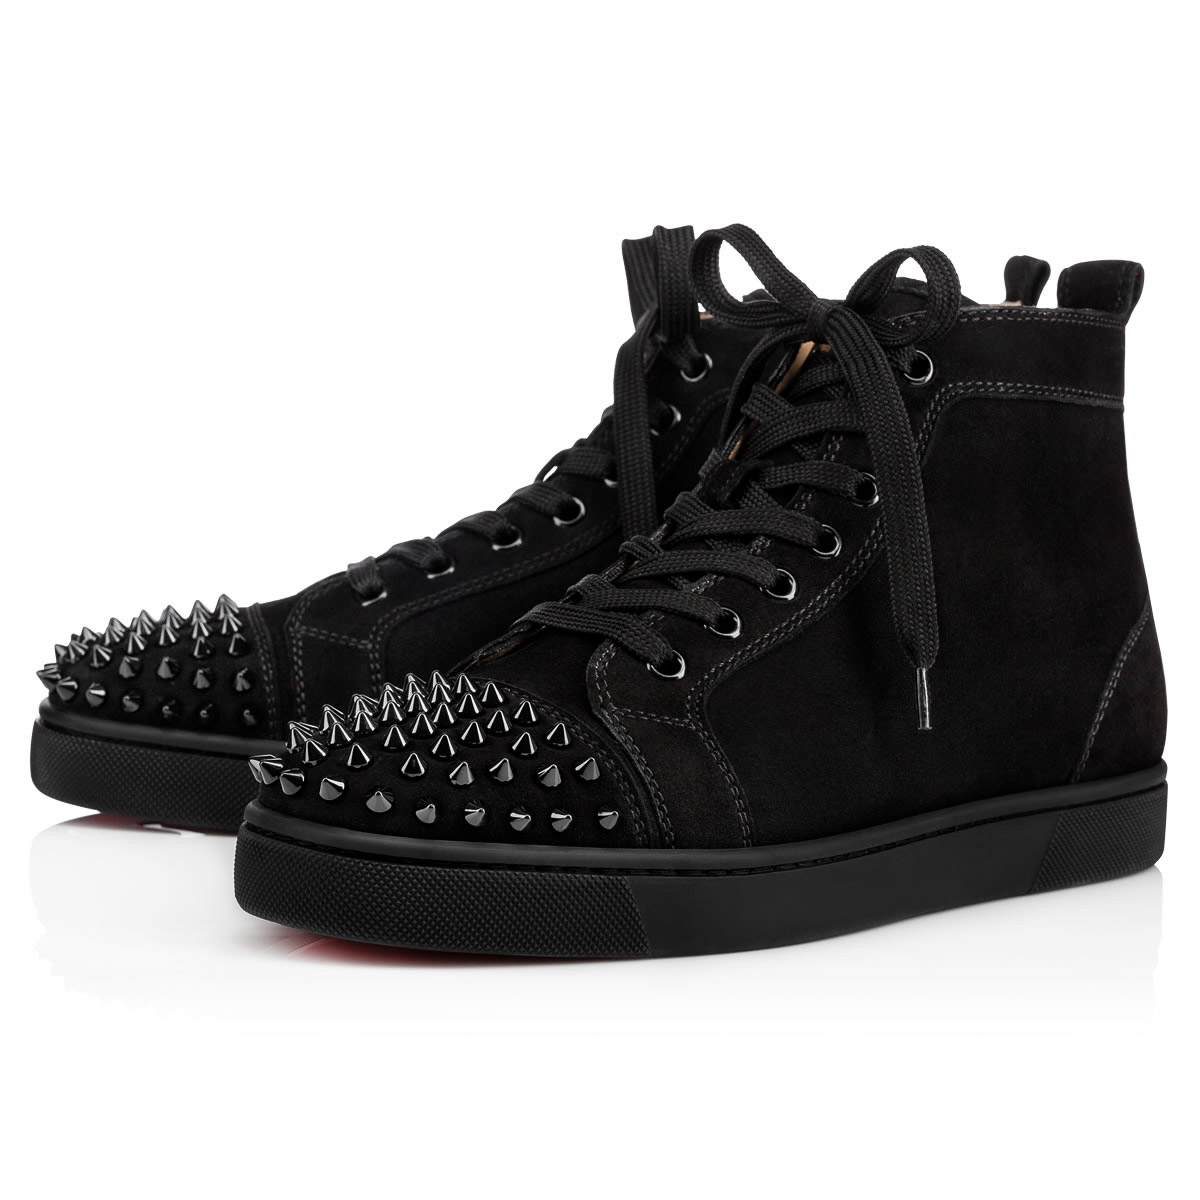 Red Louis Orlato high-top spike-stud suede trainers, Christian Louboutin